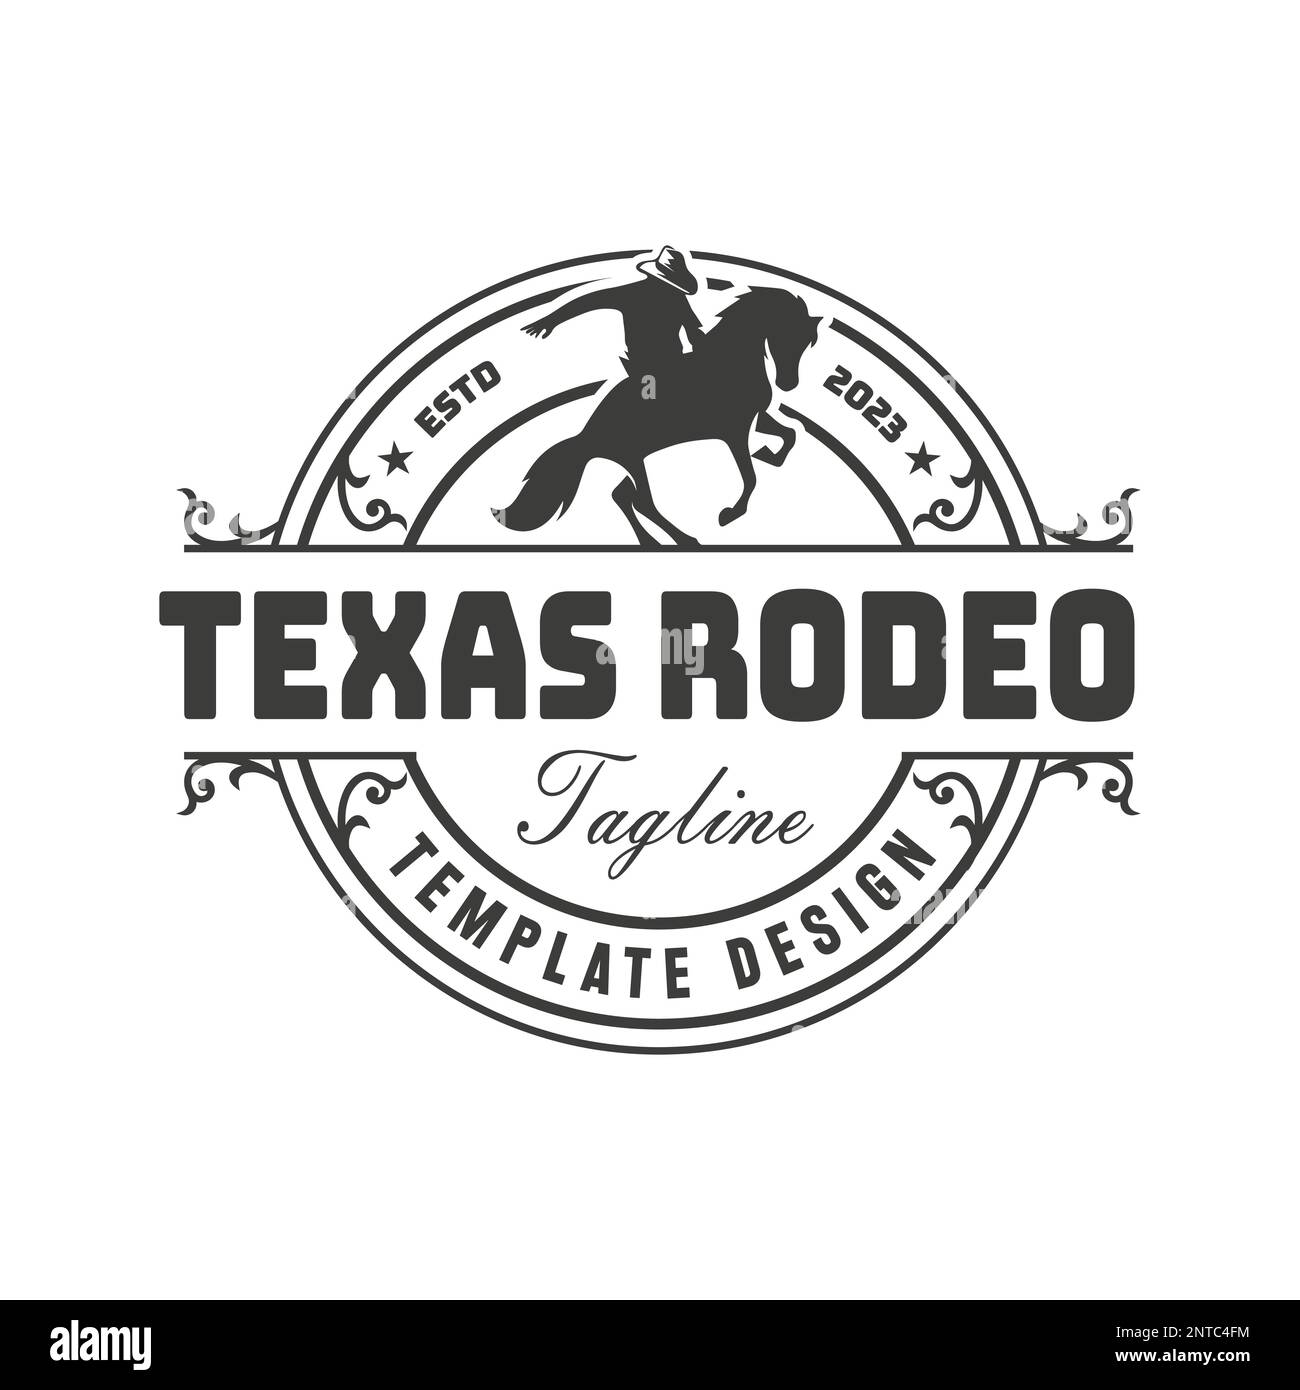 Retro Rodeo Emblem logo with equestrian silhouette. Wild west vintage rodeo badge. Vector illustration. Stock Vector